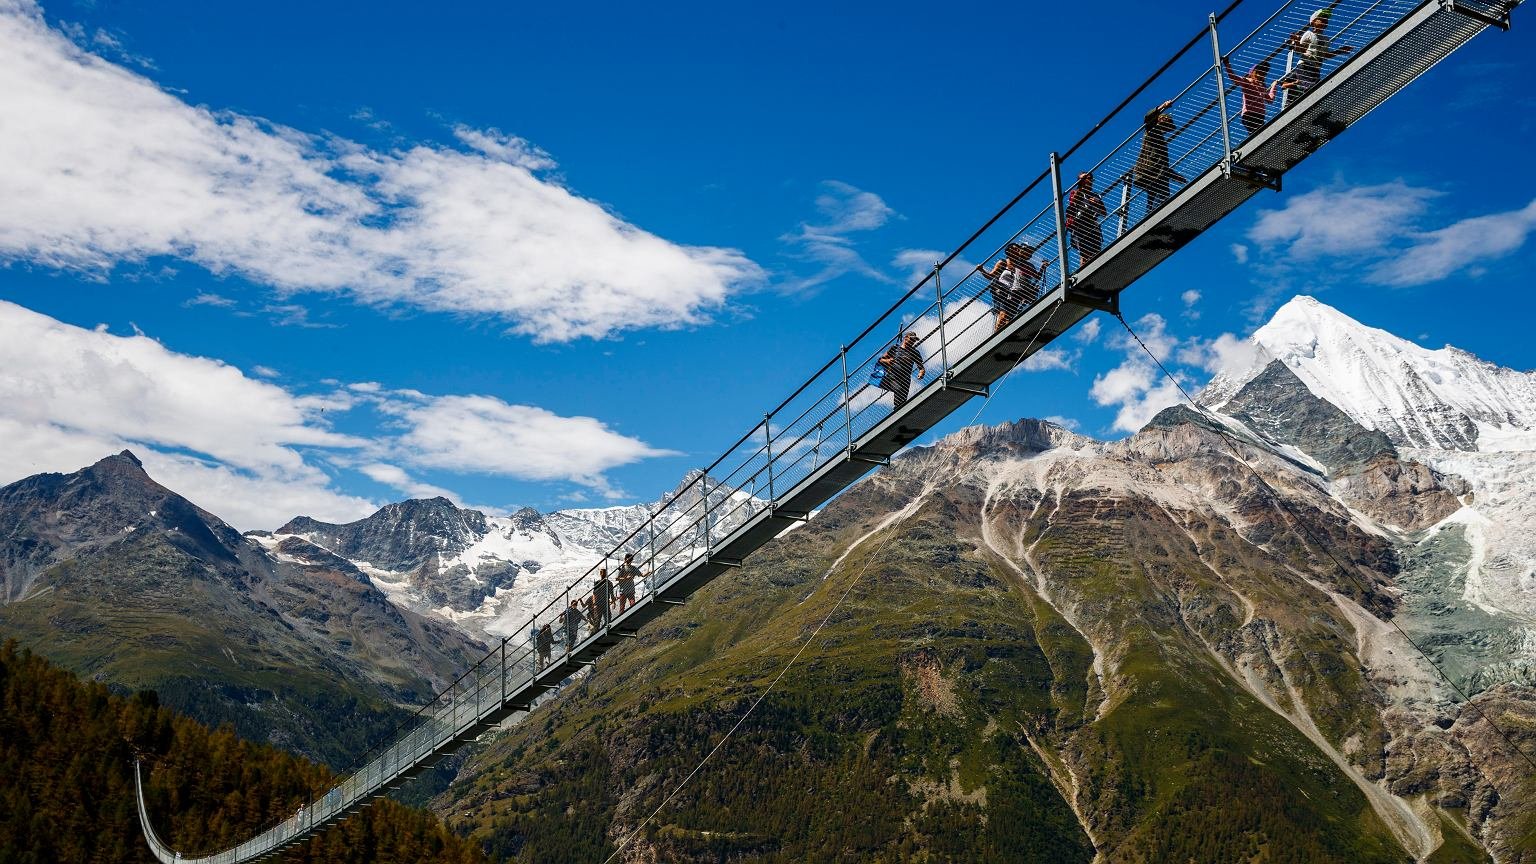 Take a look at the world’s longest pedestrian bridge that has opened in Switzerland